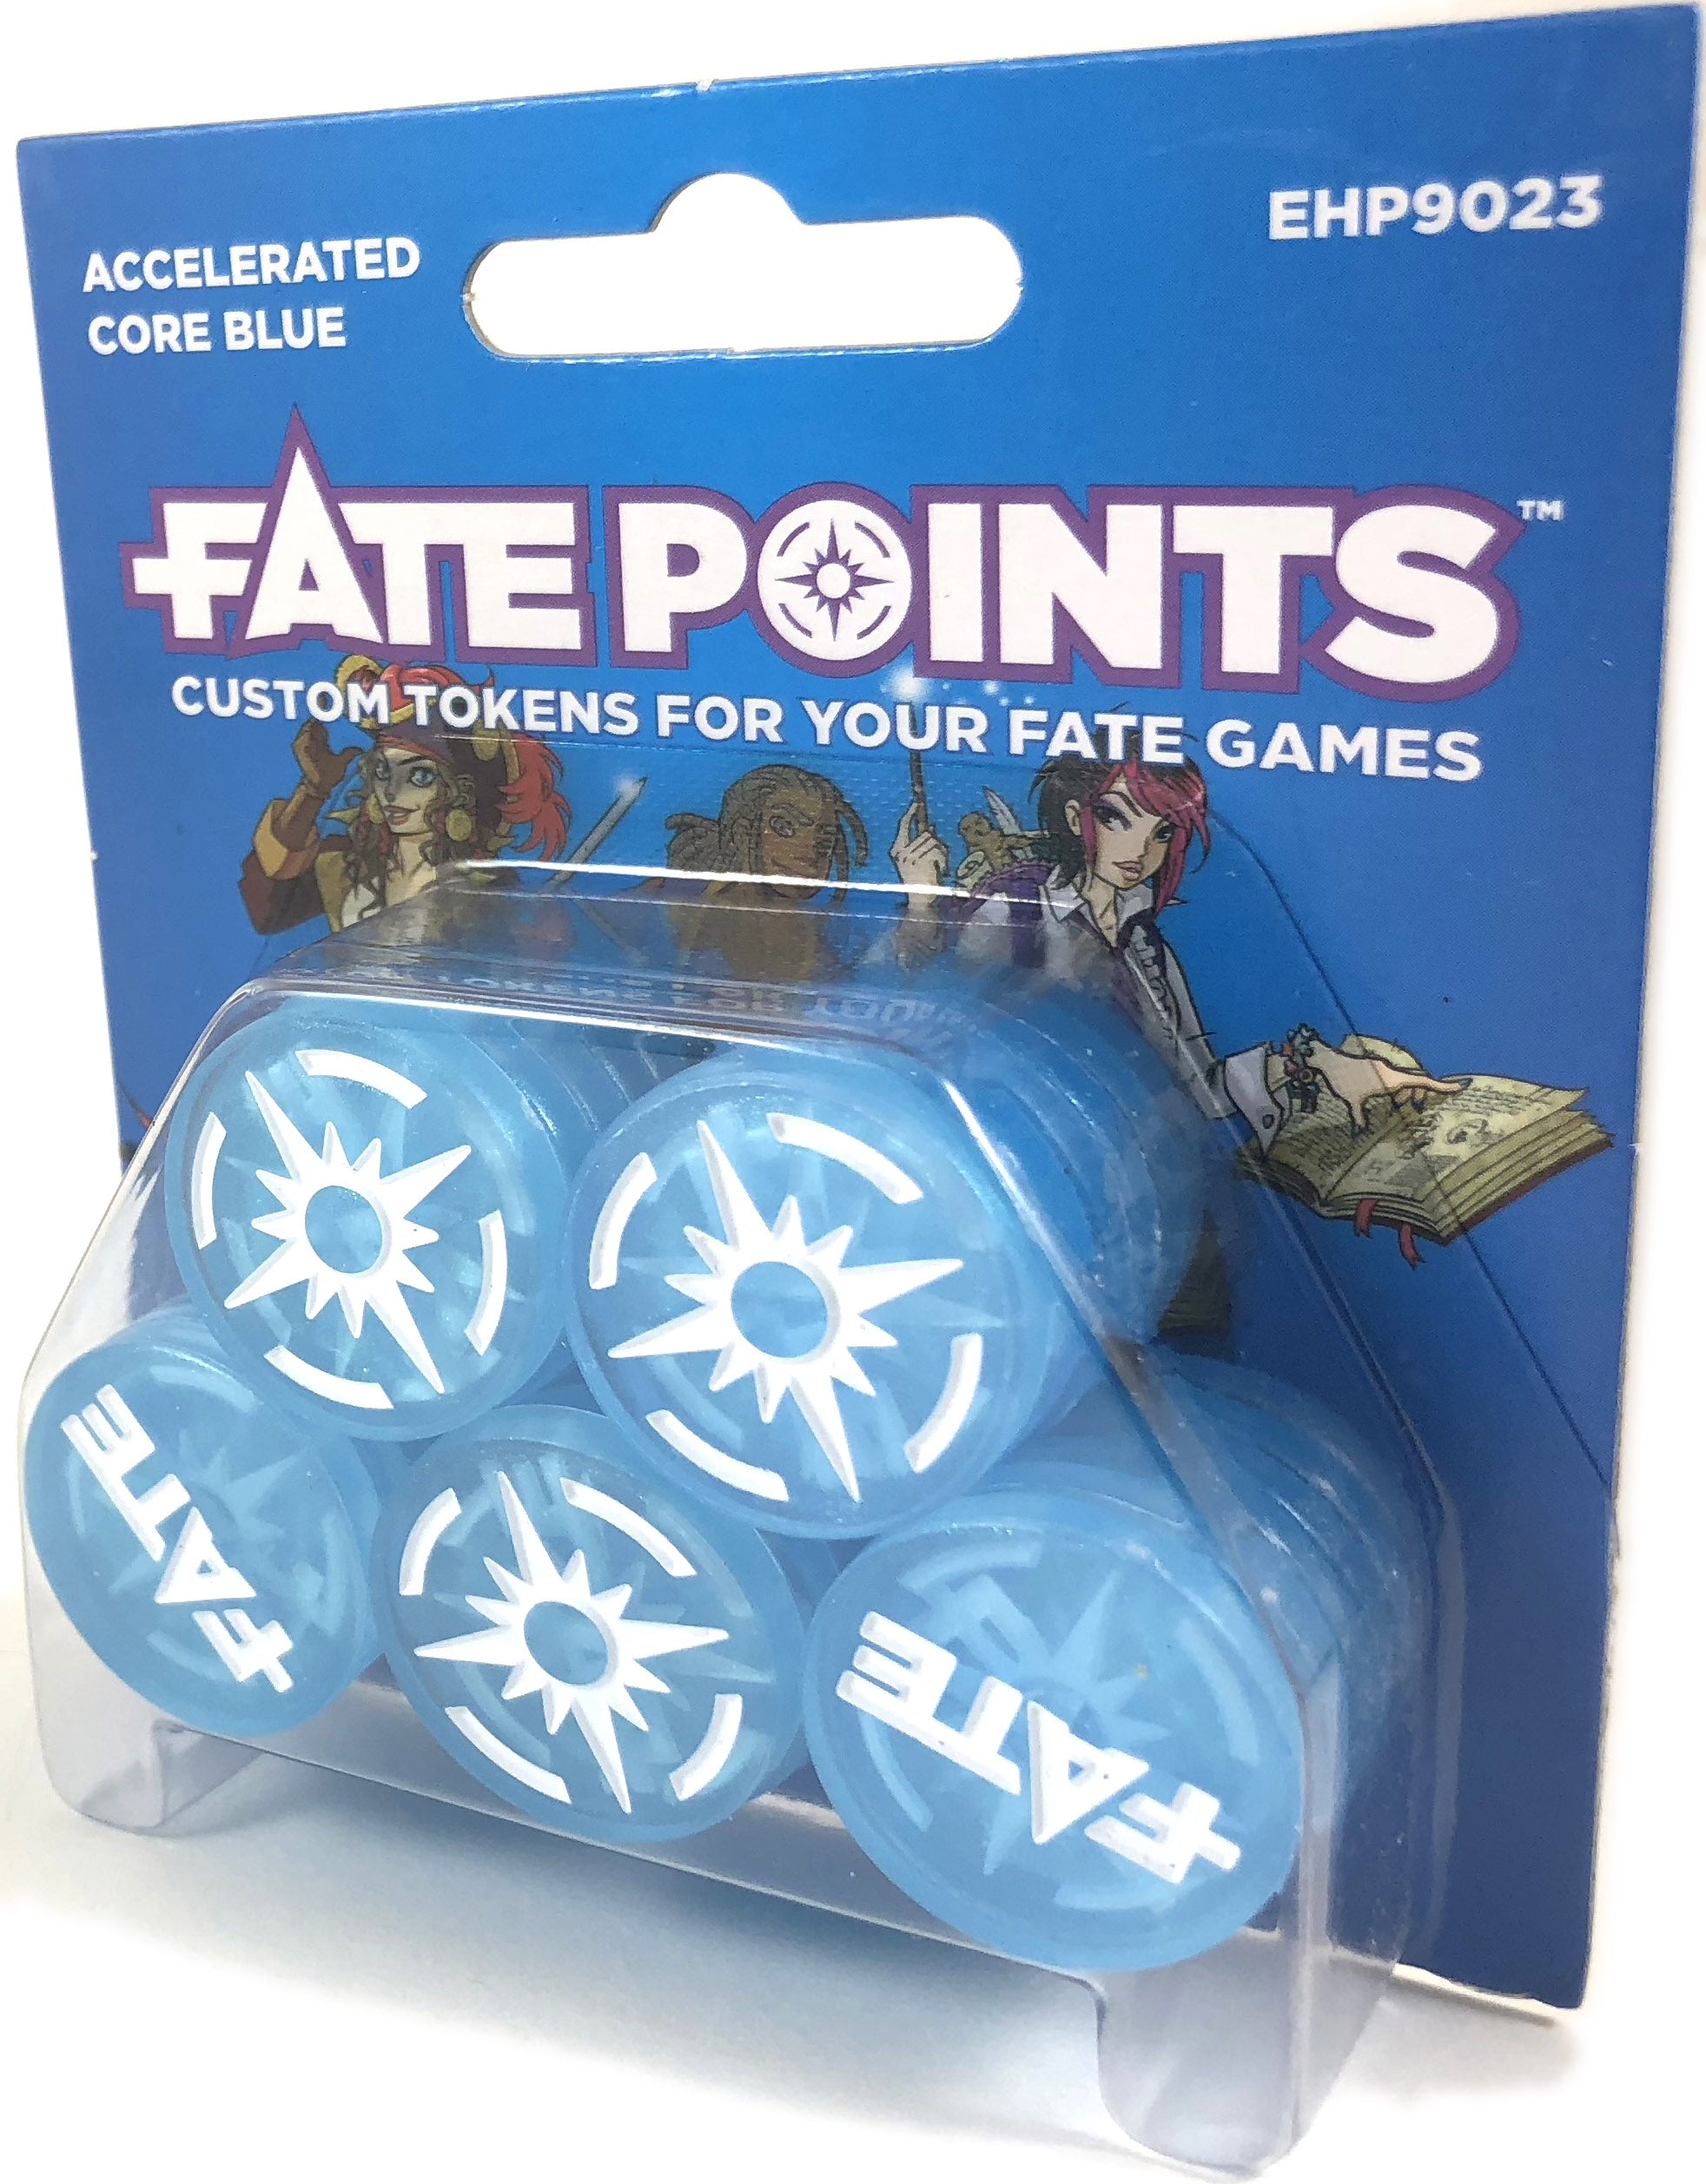 Fate Points - Acelerated Core Blue